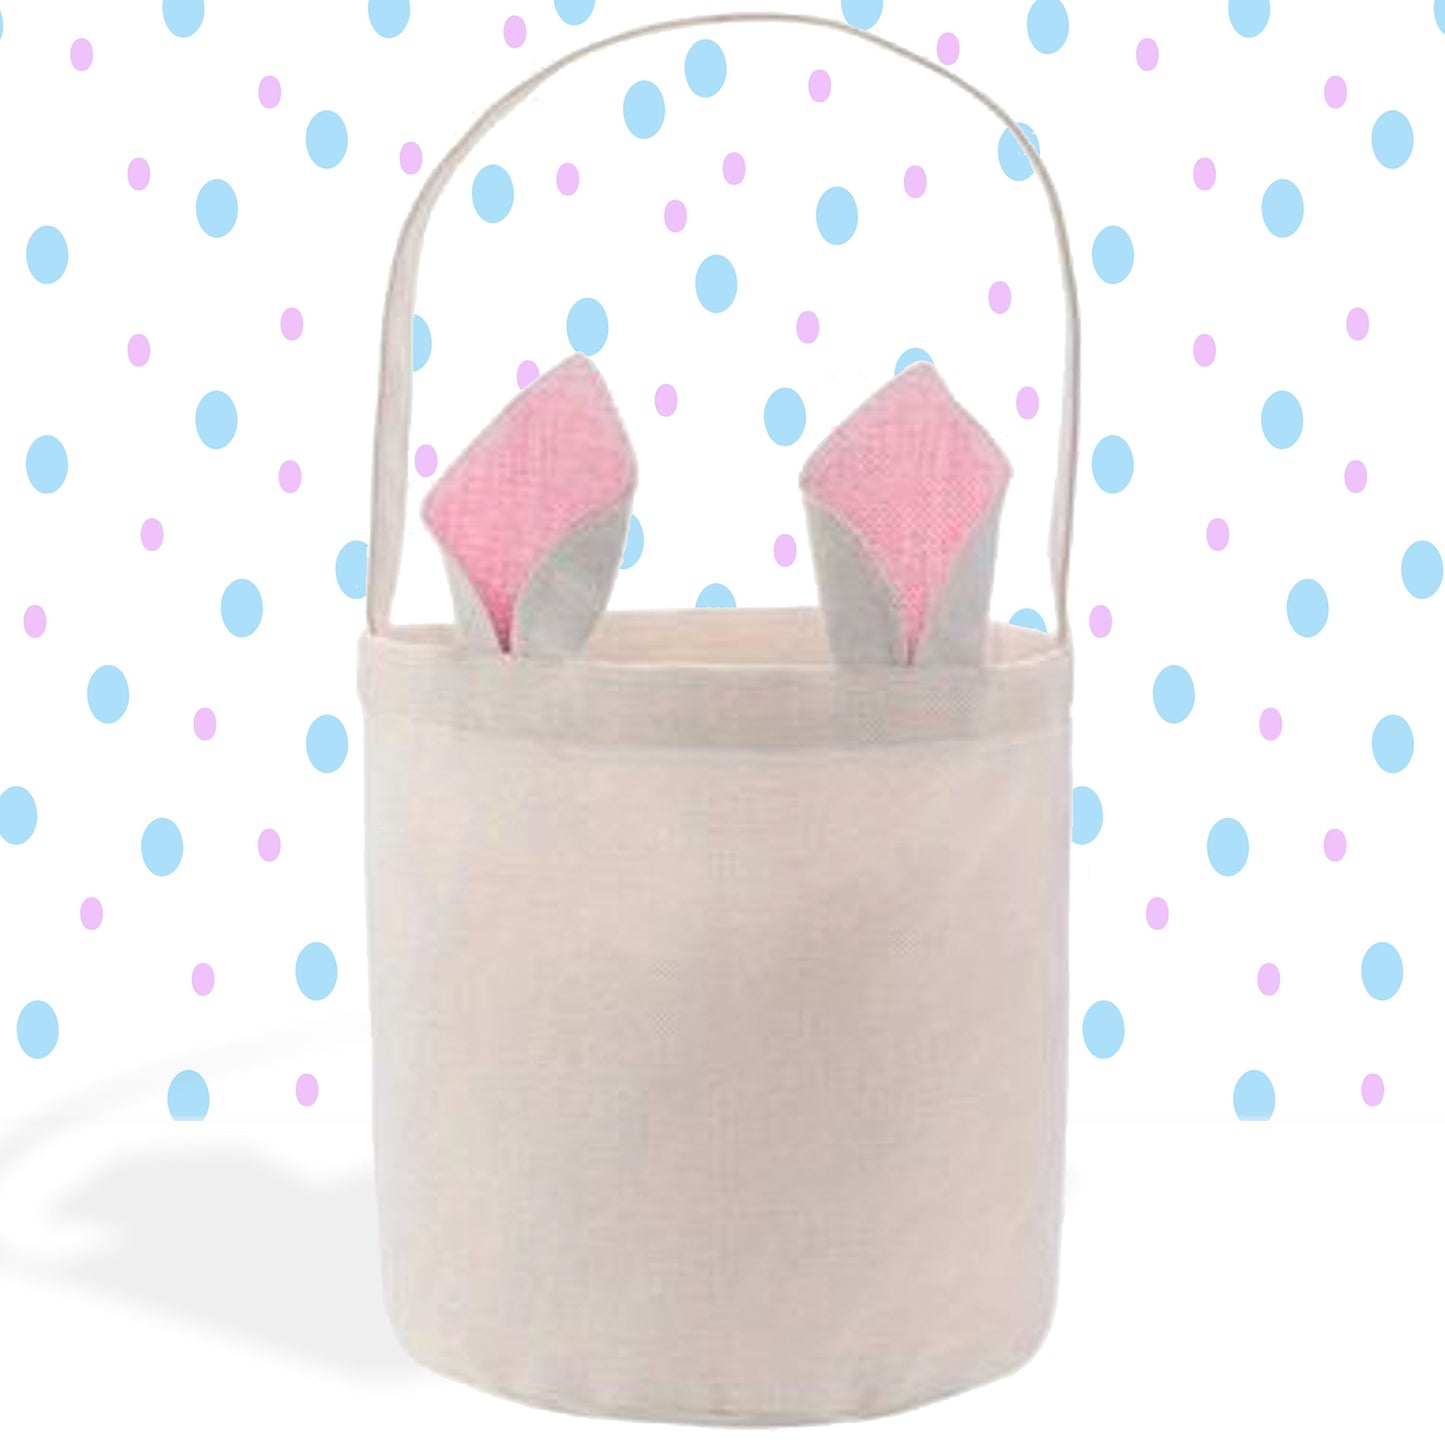 Curious Easter Bunny Flowers, Personalized Easter Basket, Custom Gift Basket, Easter Bunny Tote Bag, Girl's Linen Easter Bag, Bunny Rabbit